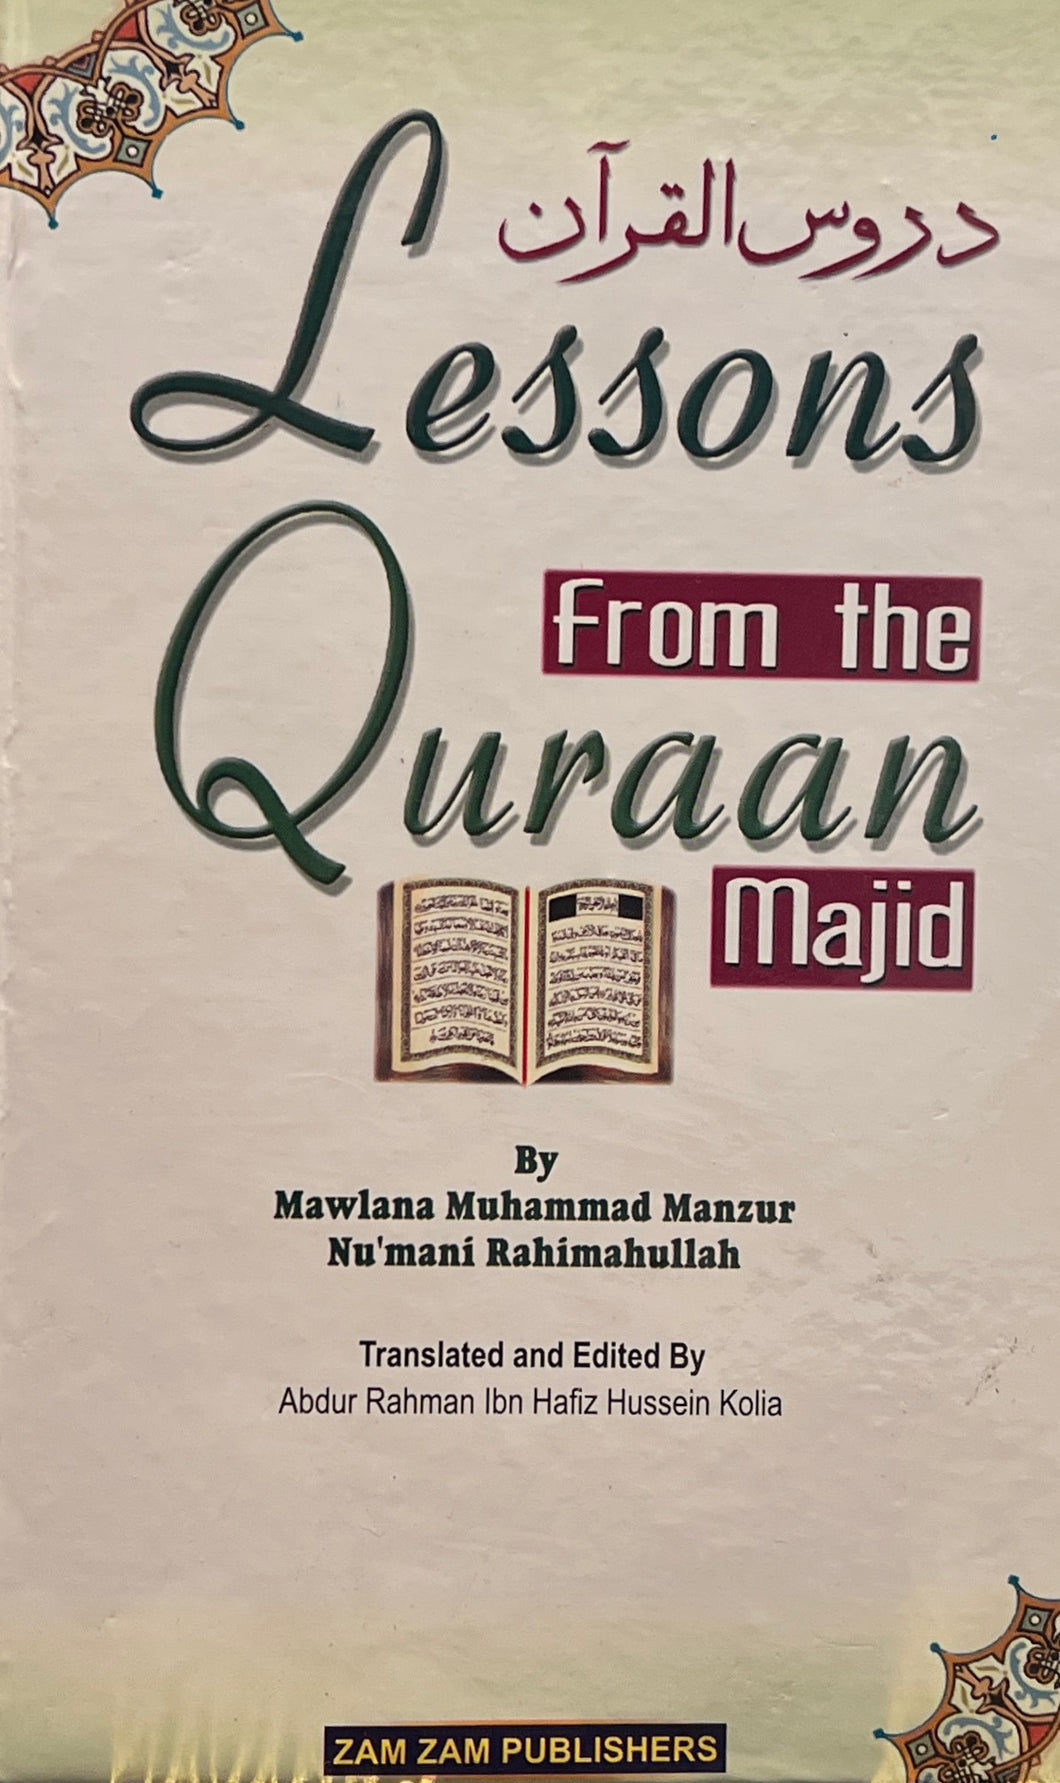 Lessons from the Quraan Majid